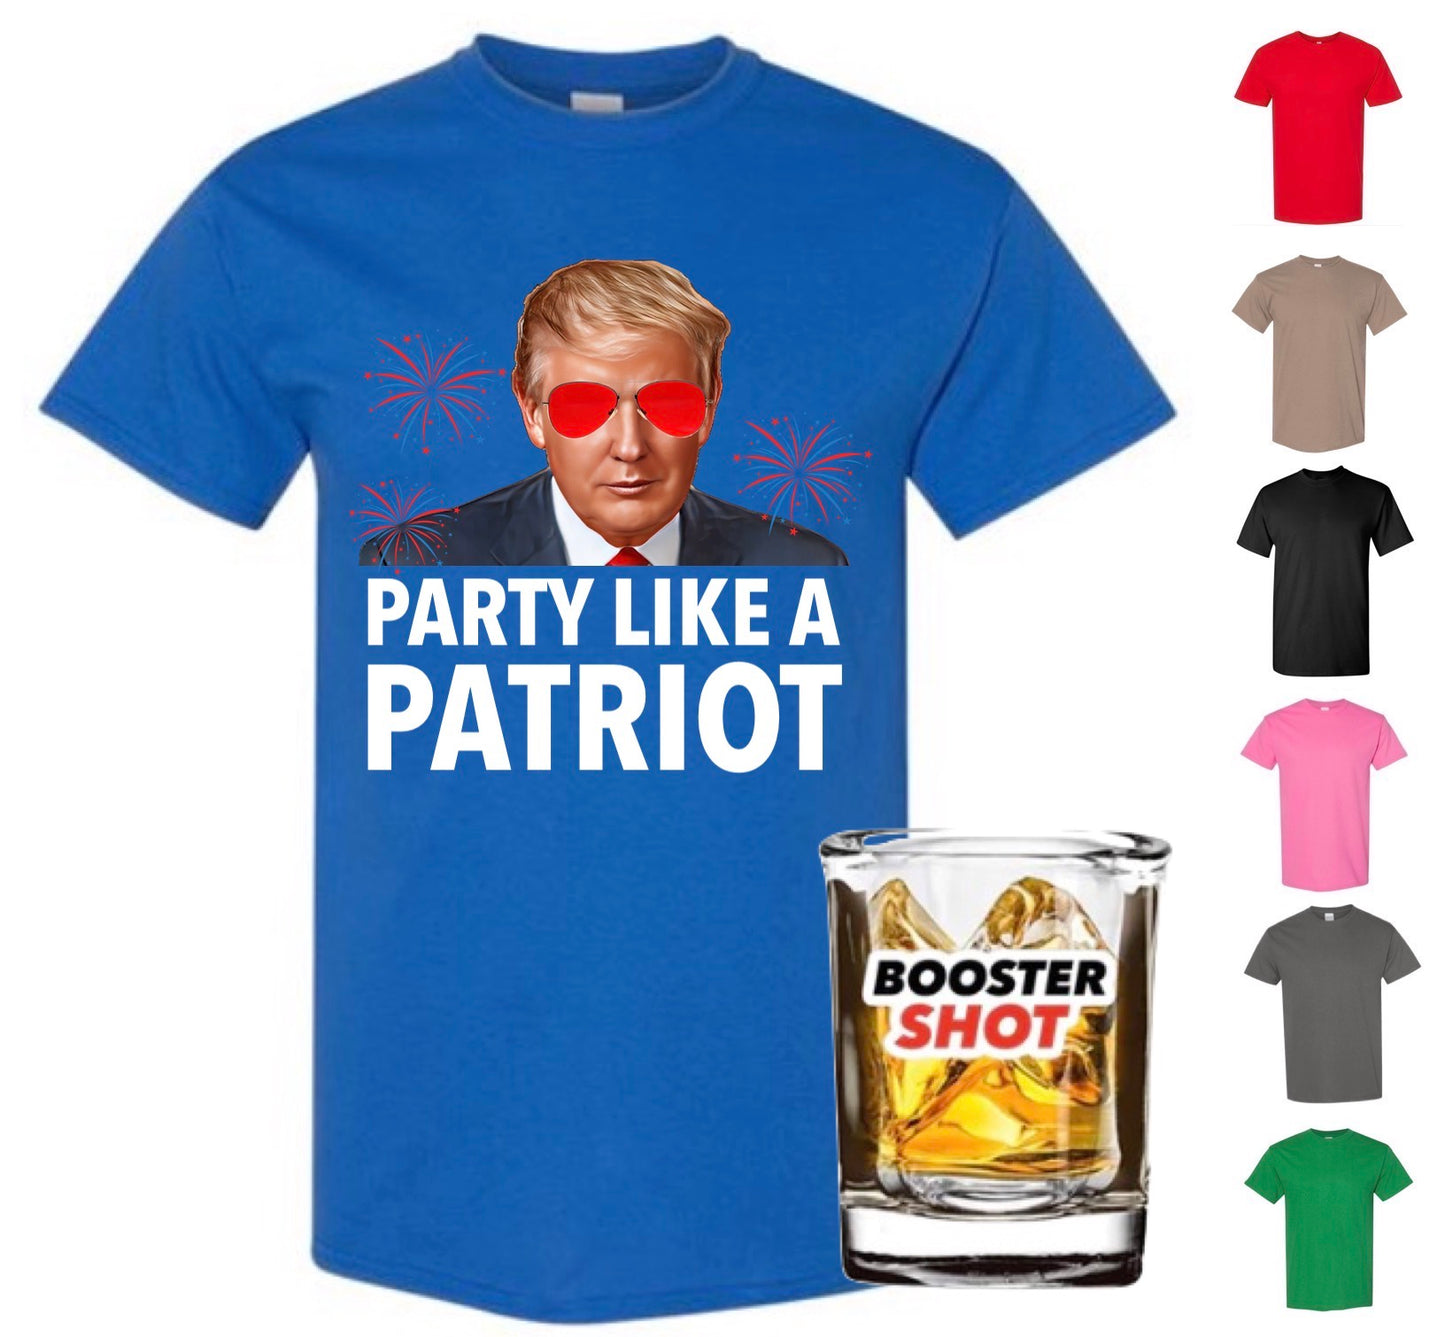 Party Like A Patriot Shirt (+FREE Booster Shot Glass)